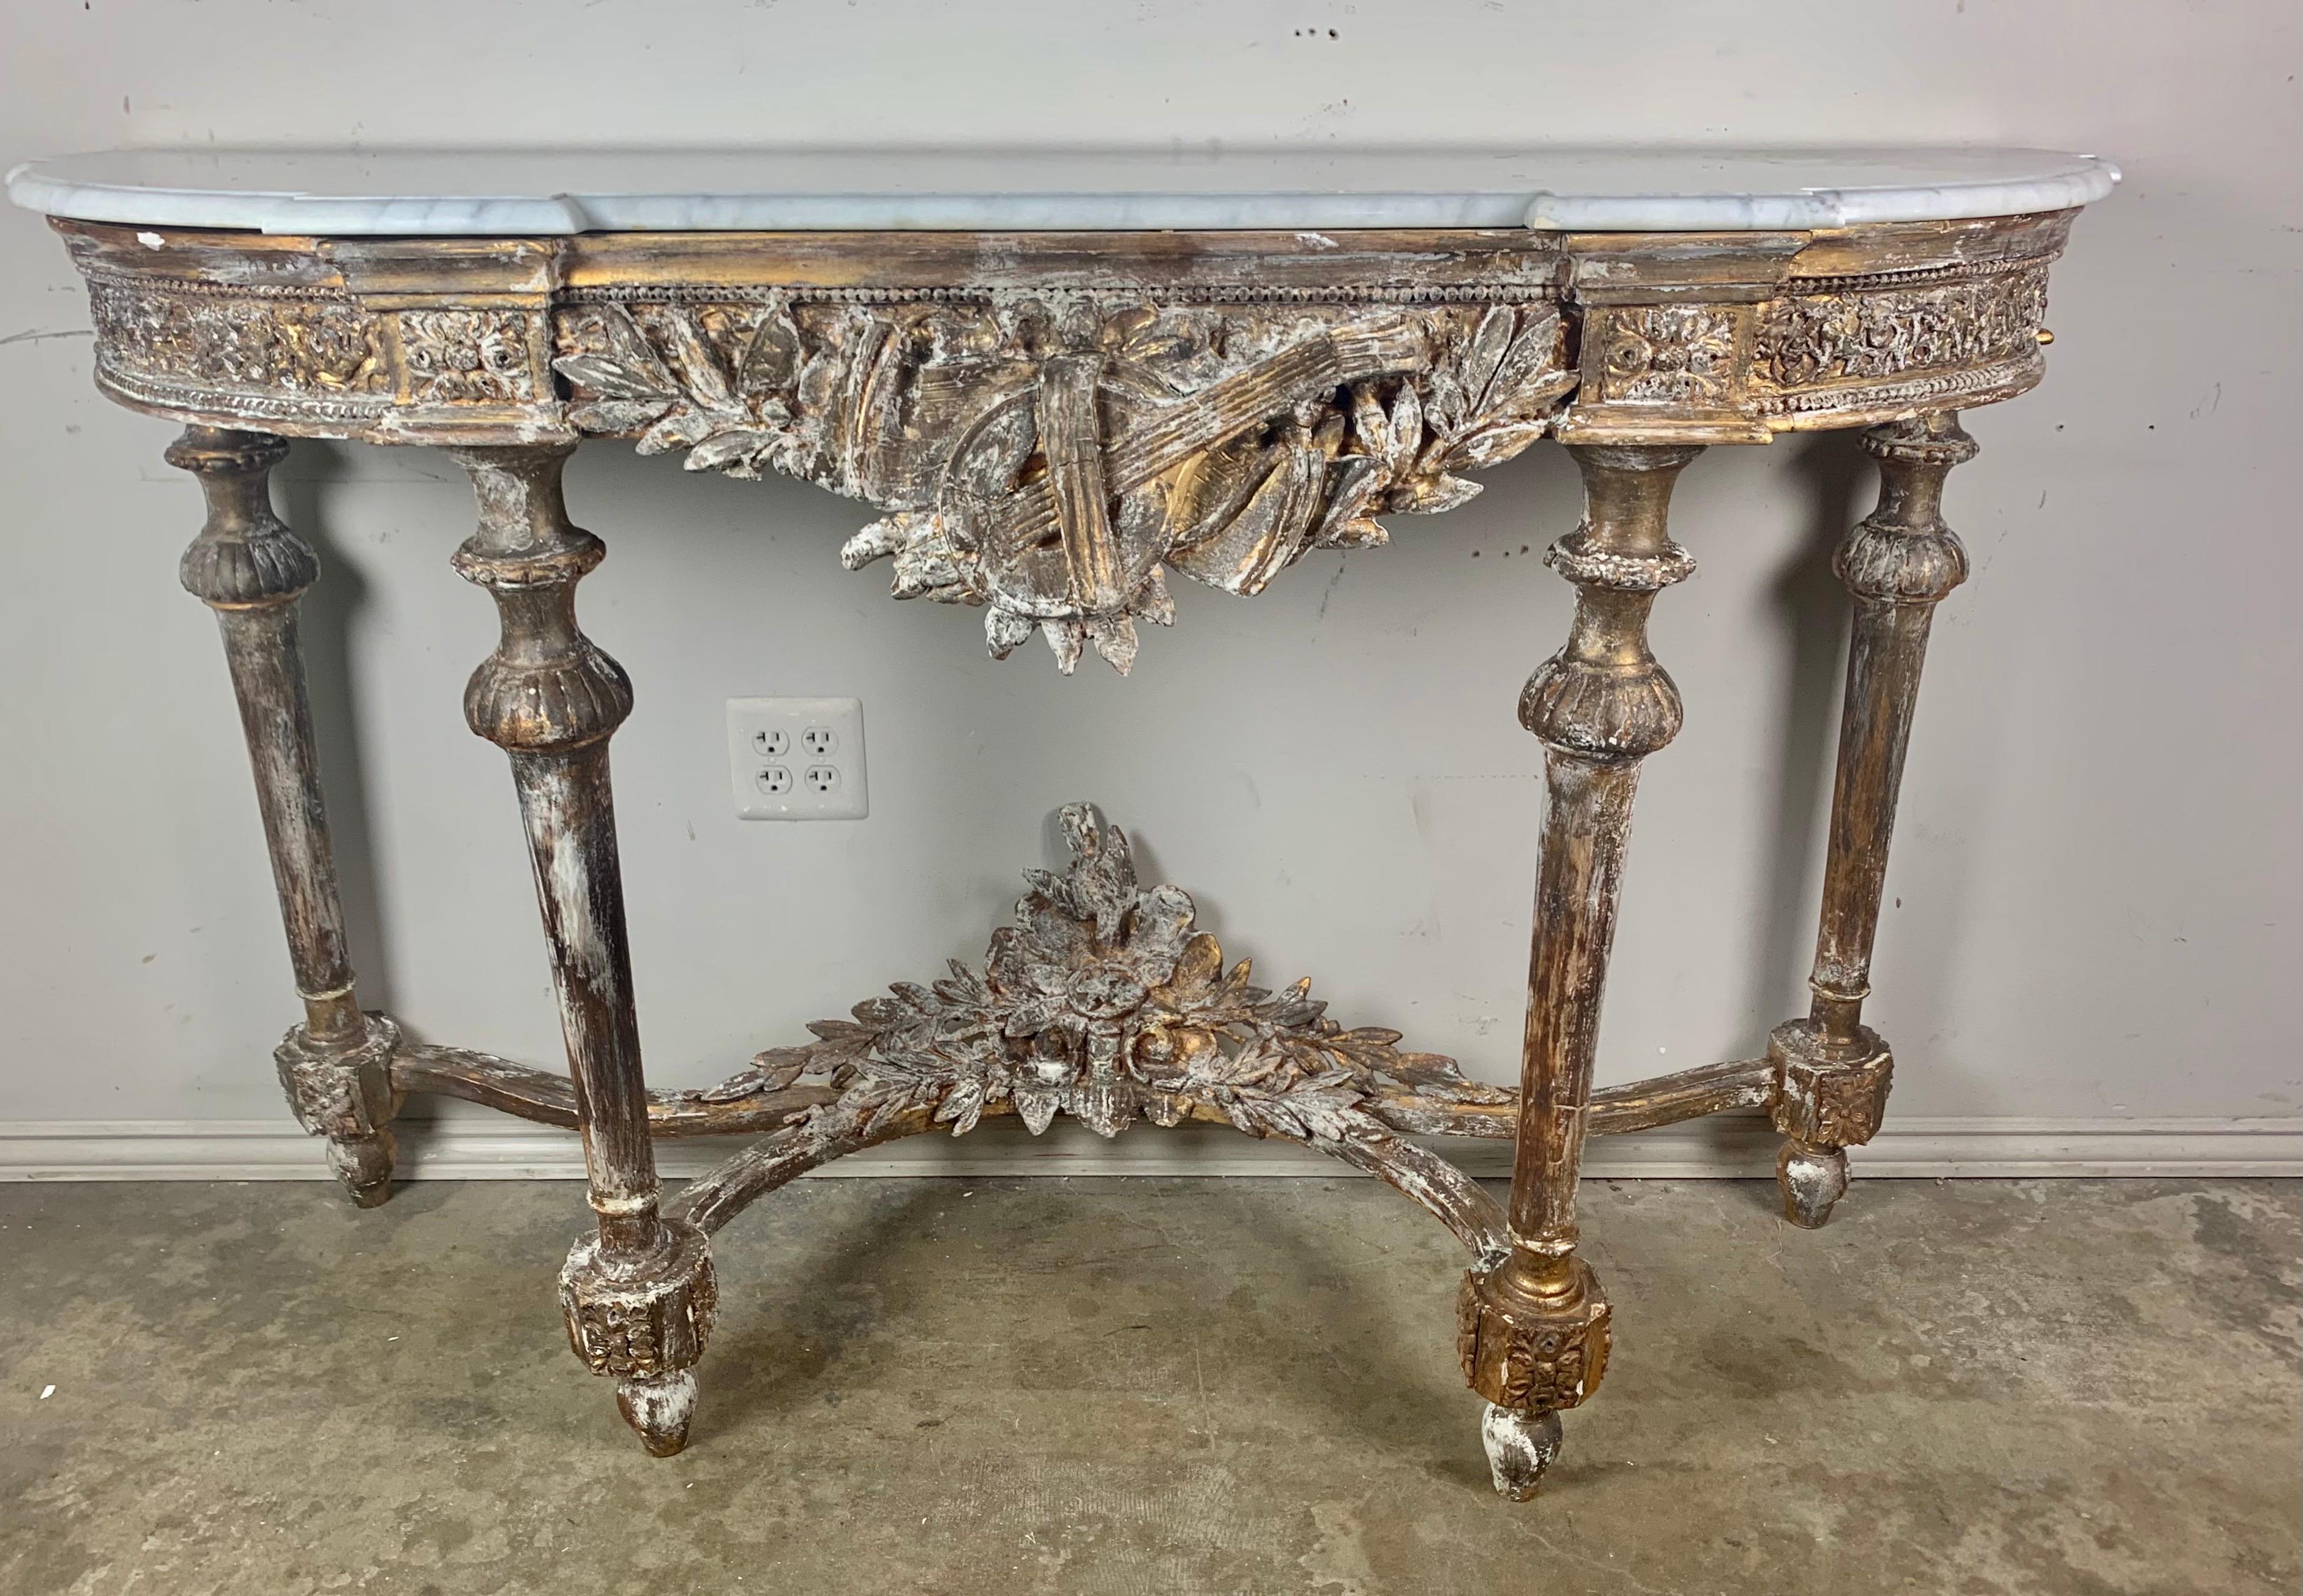 19th C. French gilt wood Louis XVI style console with Carrara marble top. The console stands on four straights legs that meet at a carved stretcher with intricate details throughout. The apron of the console depicts an instrument, laurel leaves,